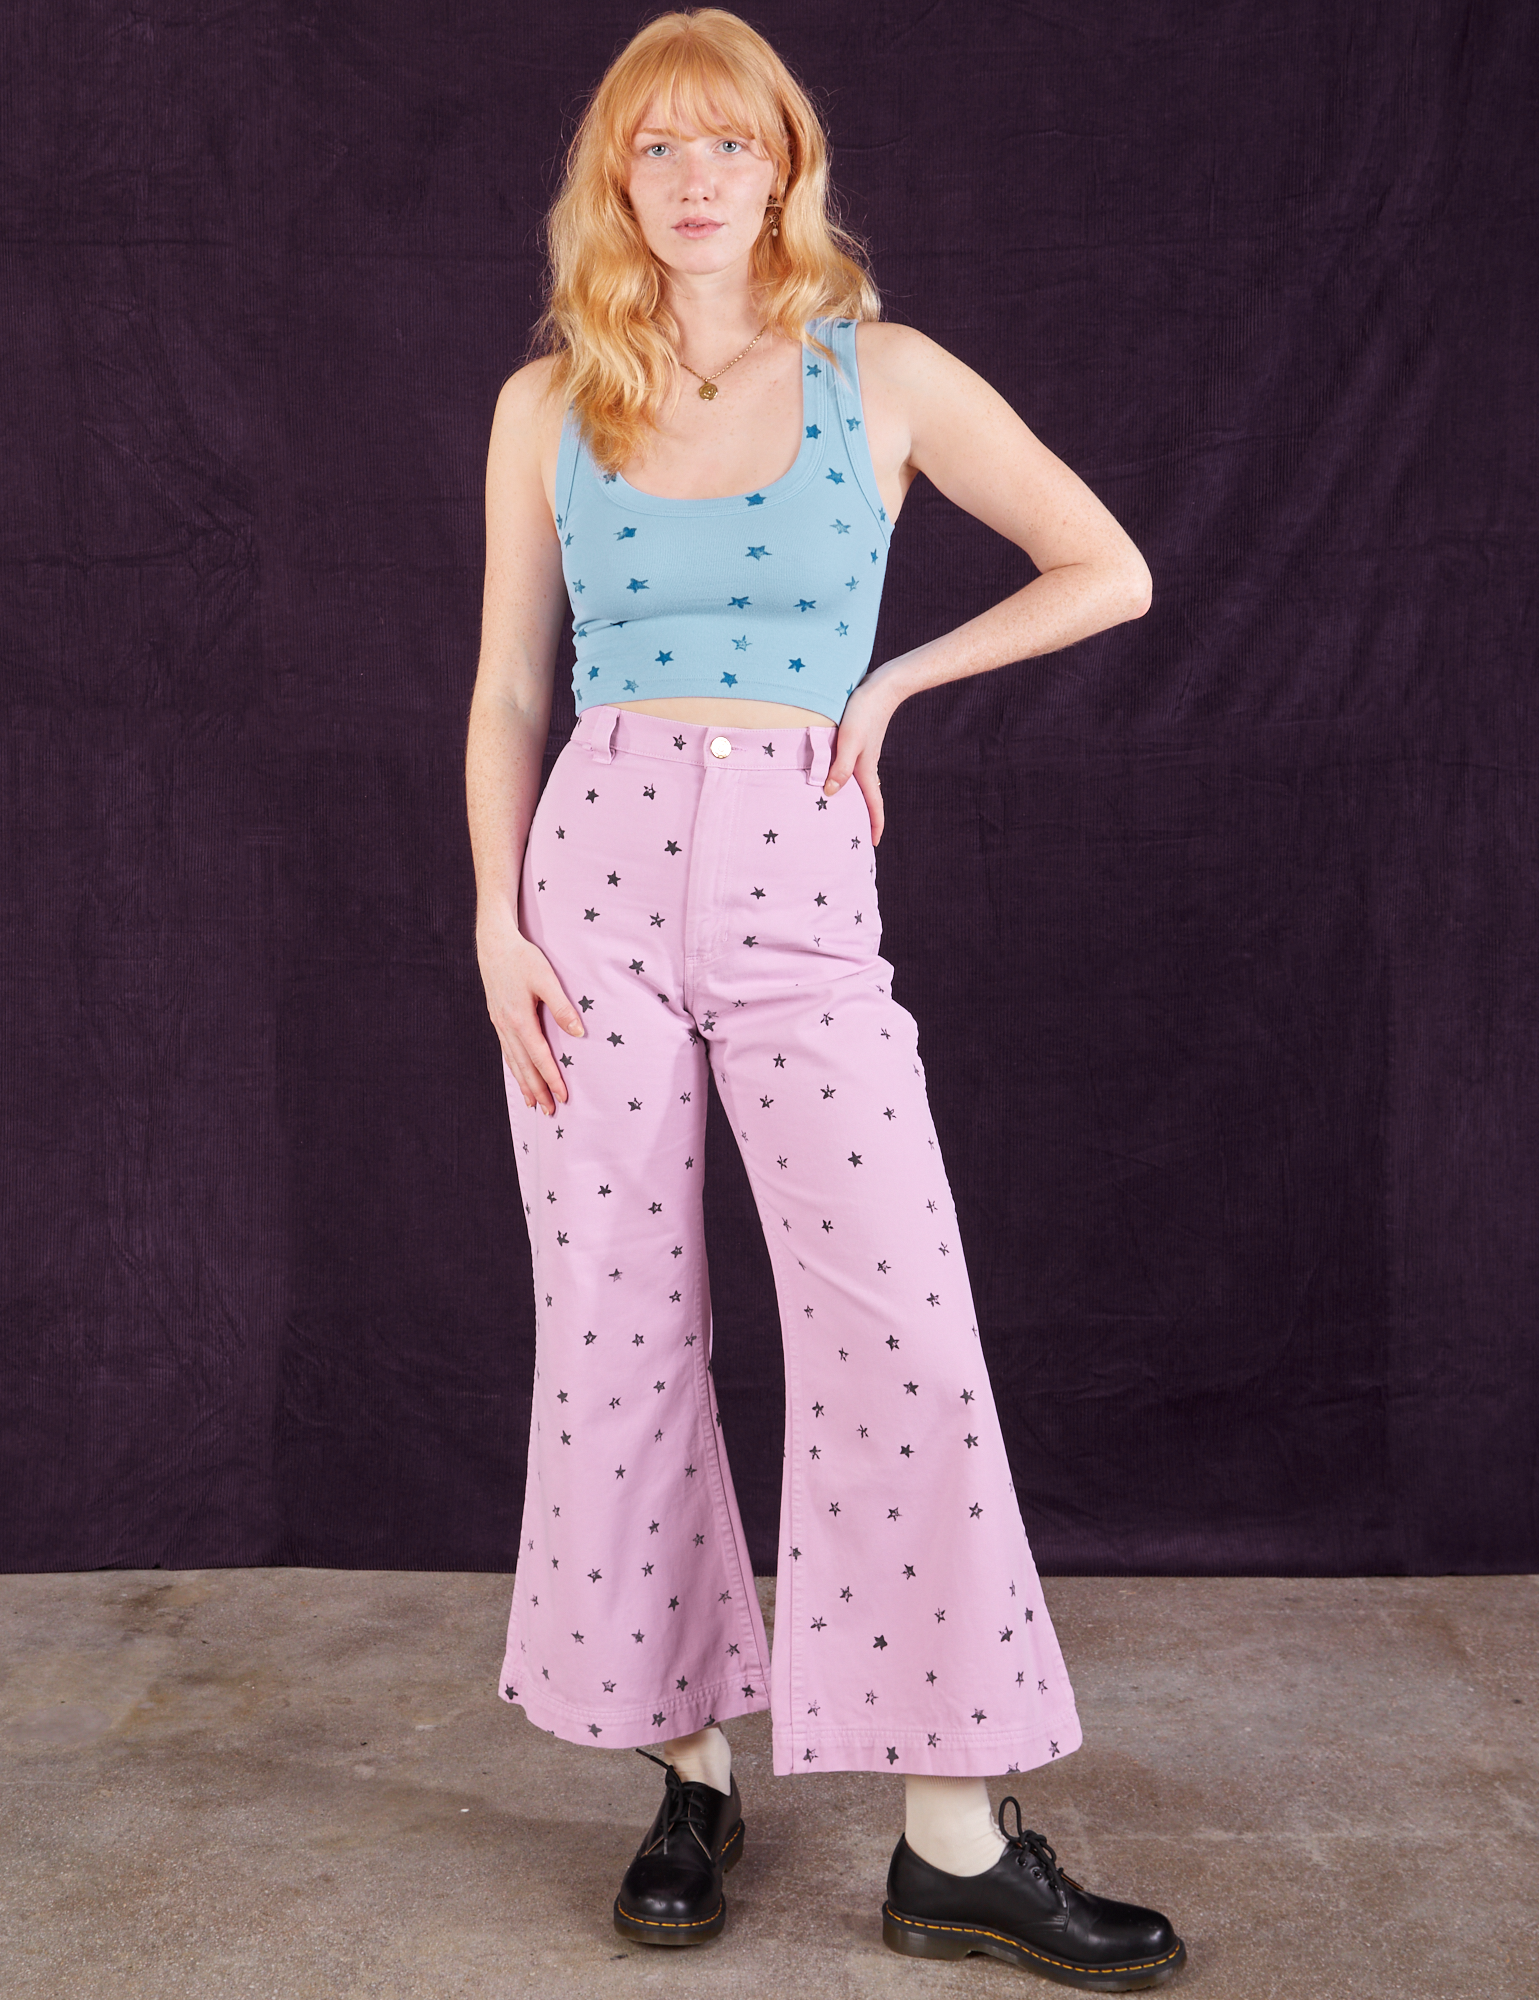 Margaret is wearing Star Bell Bottoms in Lilac Purple paired with Star Cropped Tank in blue